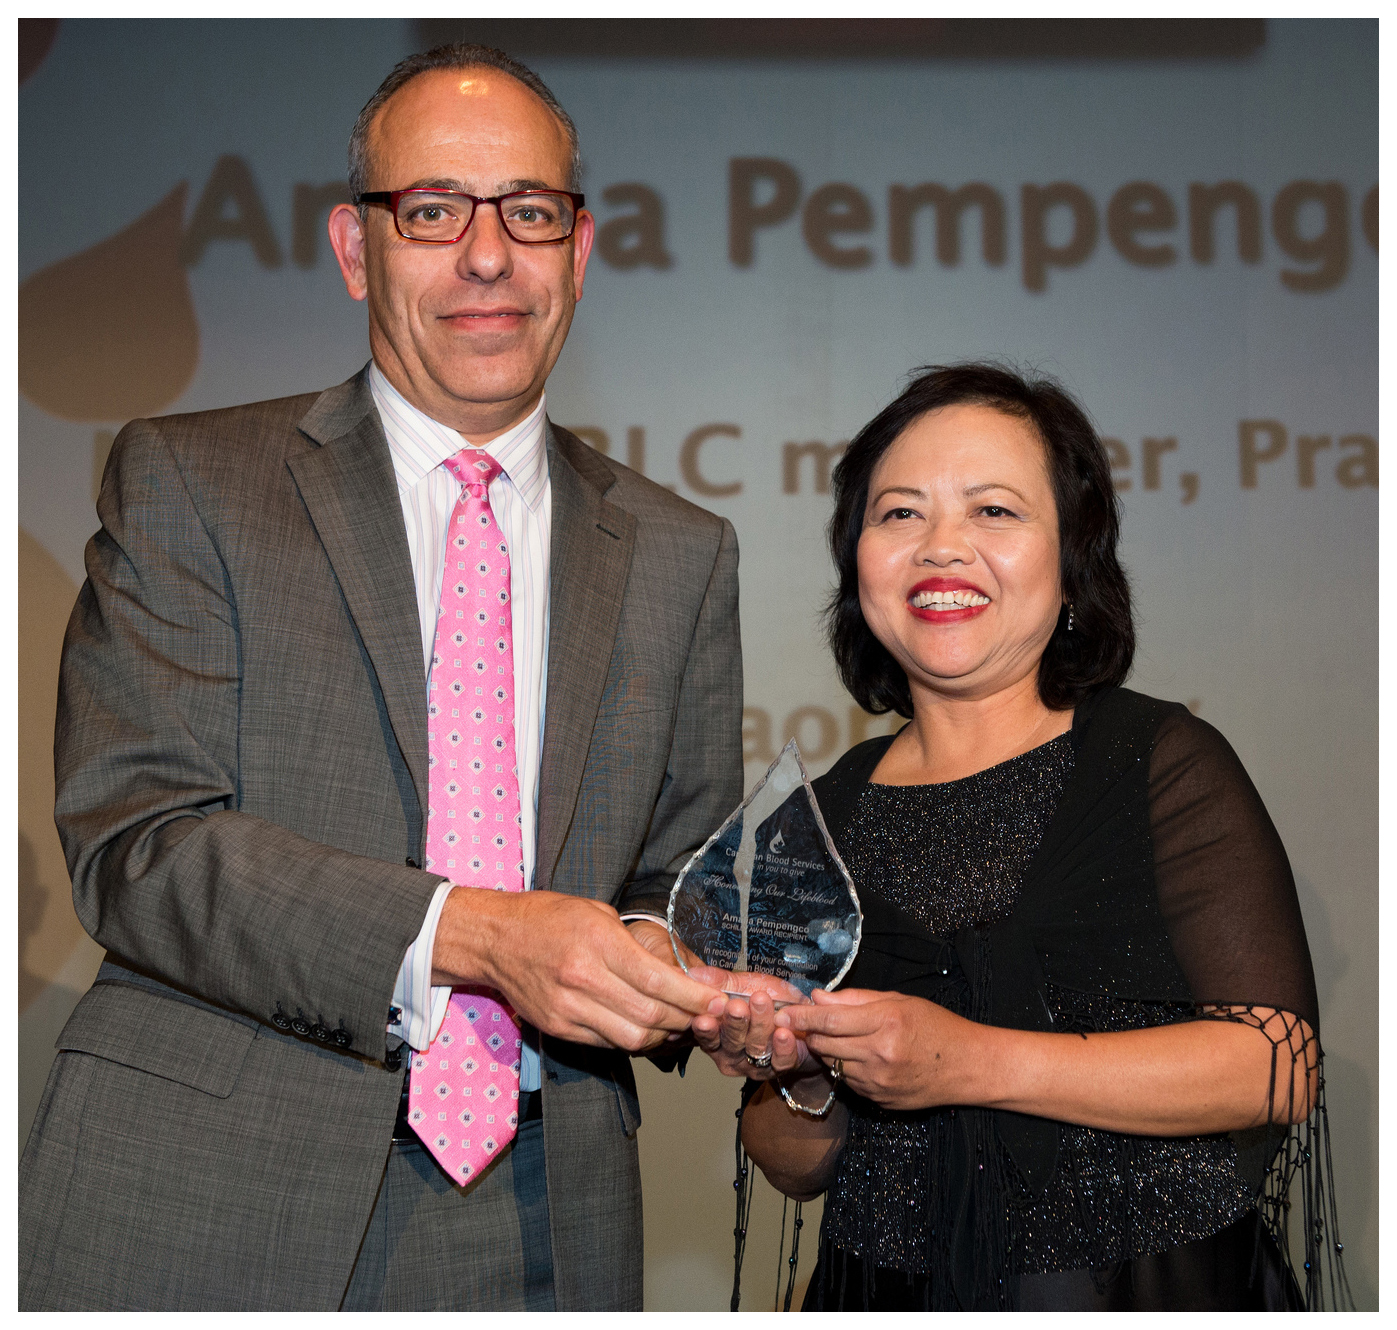 Dr. Graham Sher (left) honours longtime volunteer, the late Amalia Pempengco (right) with a Schilly Award